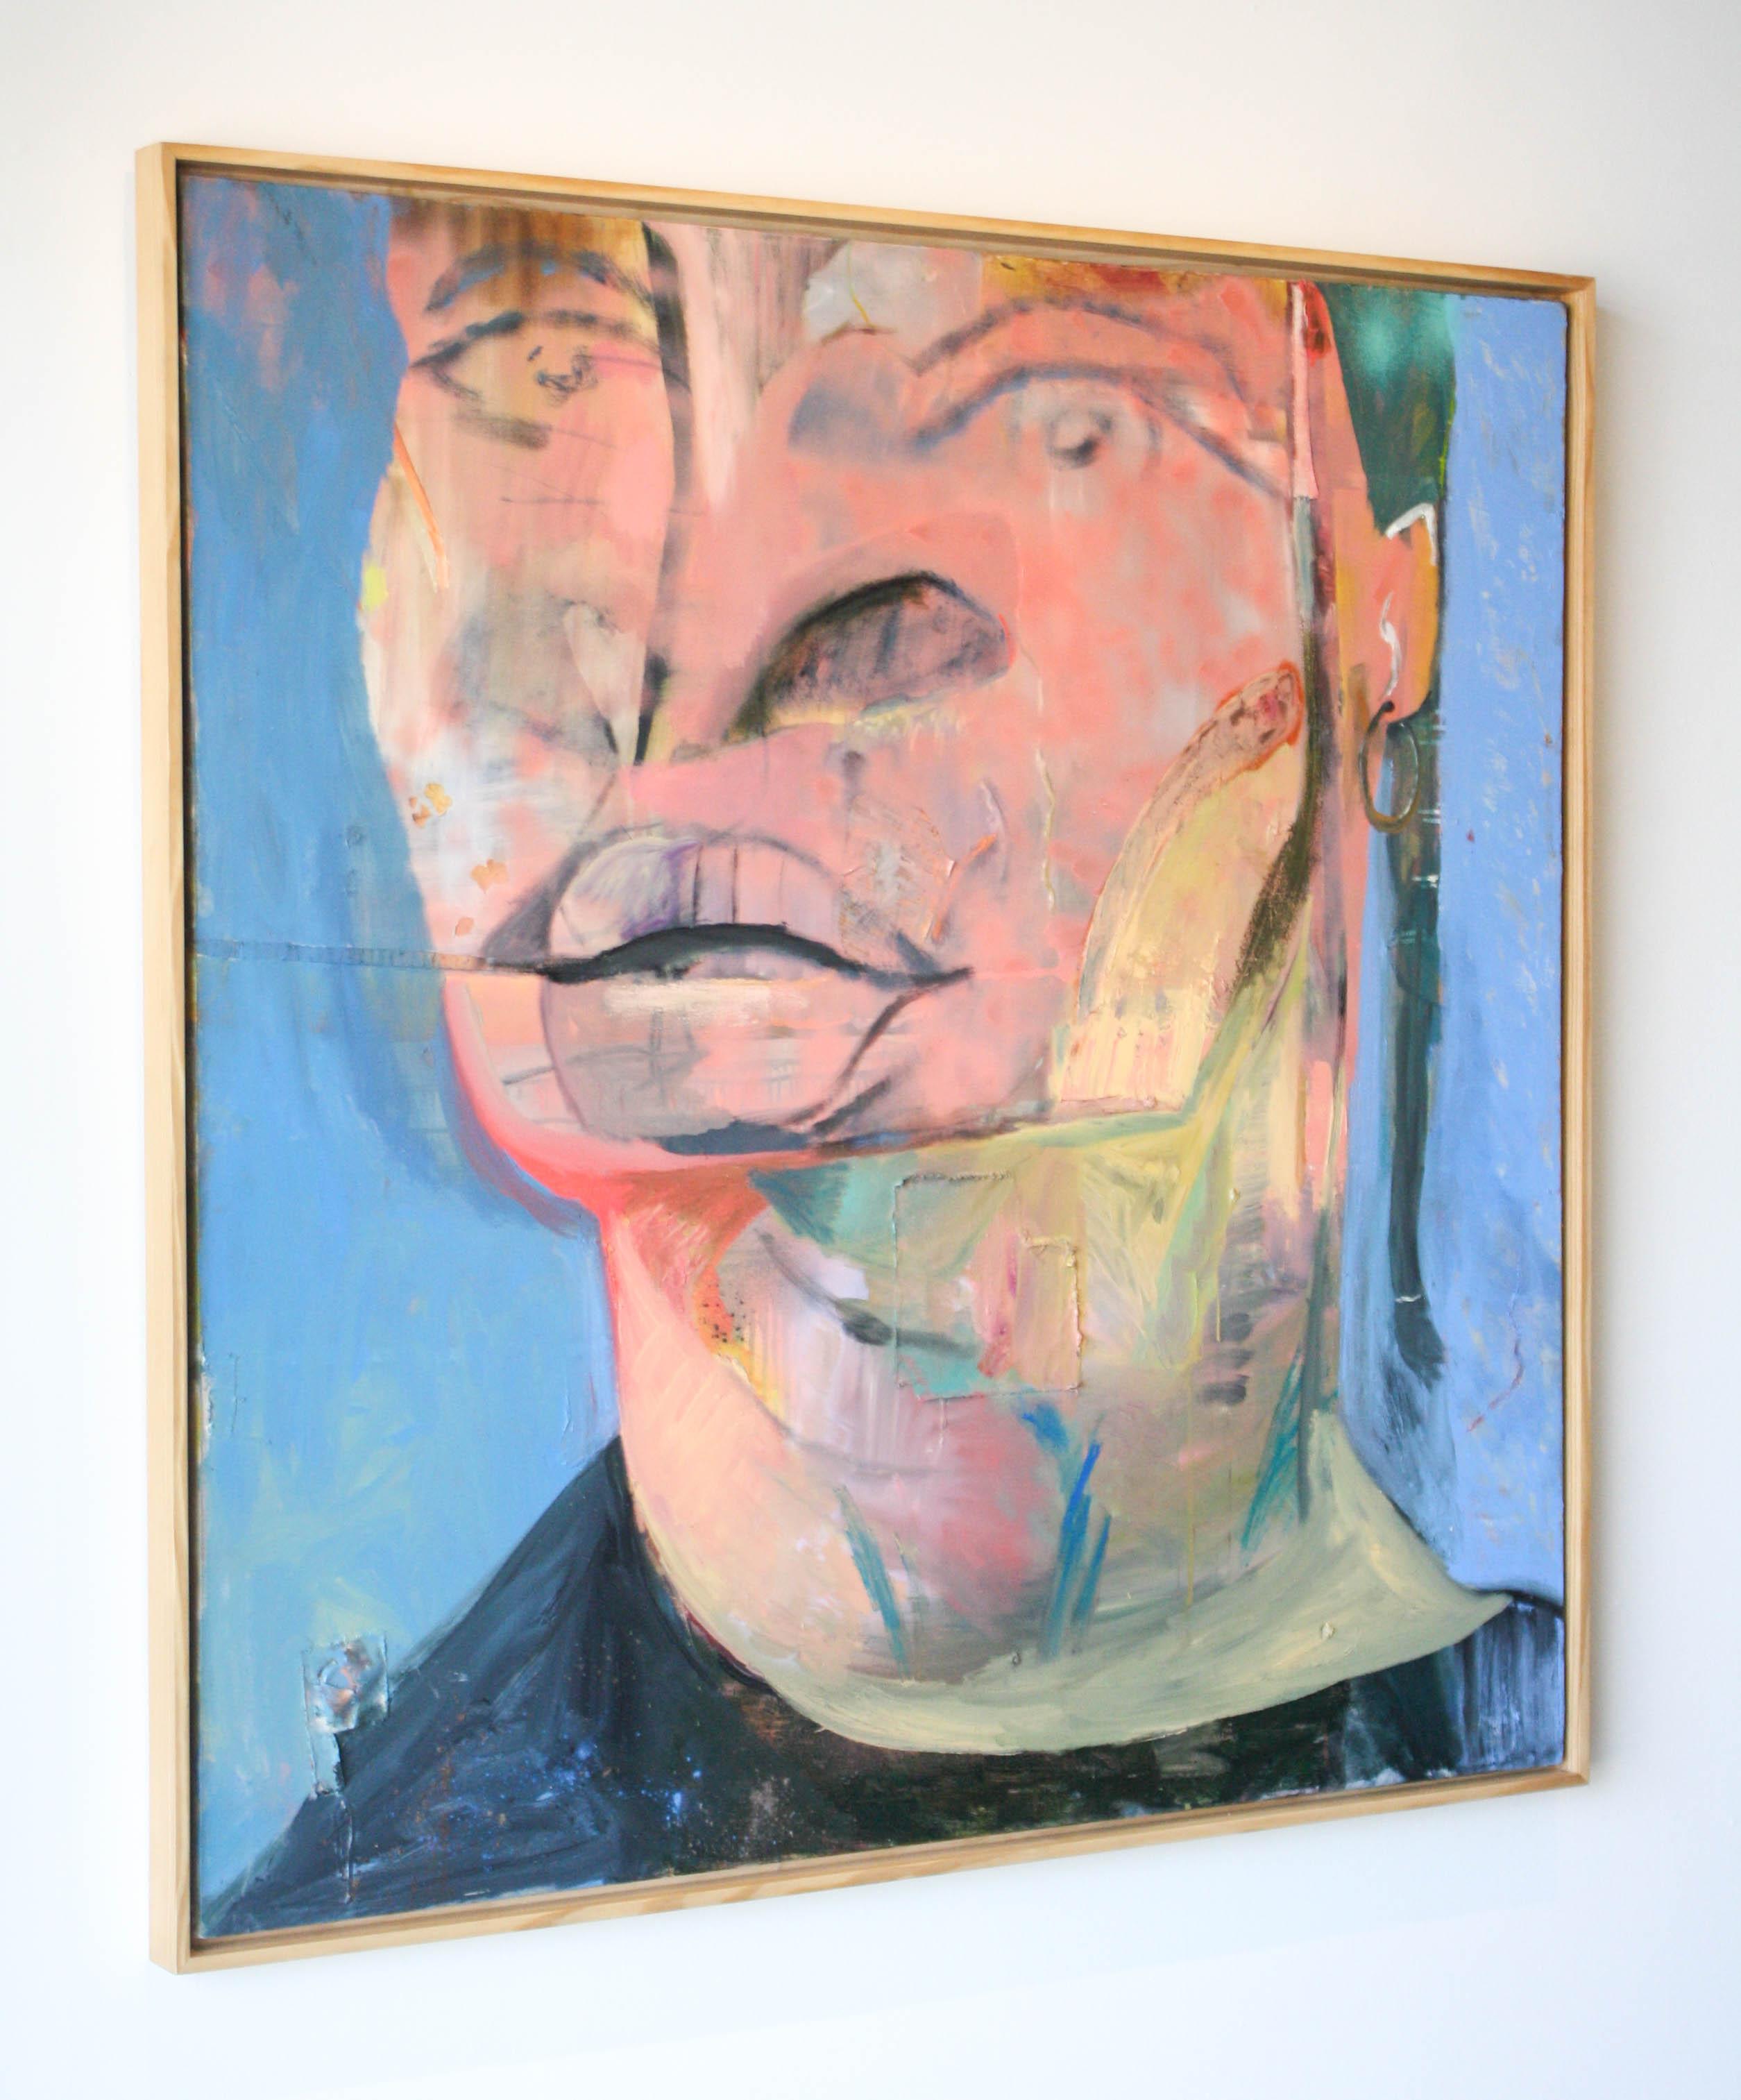 Feeling- Acrylic, Canvas, Charcoal, Fabric, Oil Crayon, Paint, Pigment, Portrait - Painting by John Paul Kesling